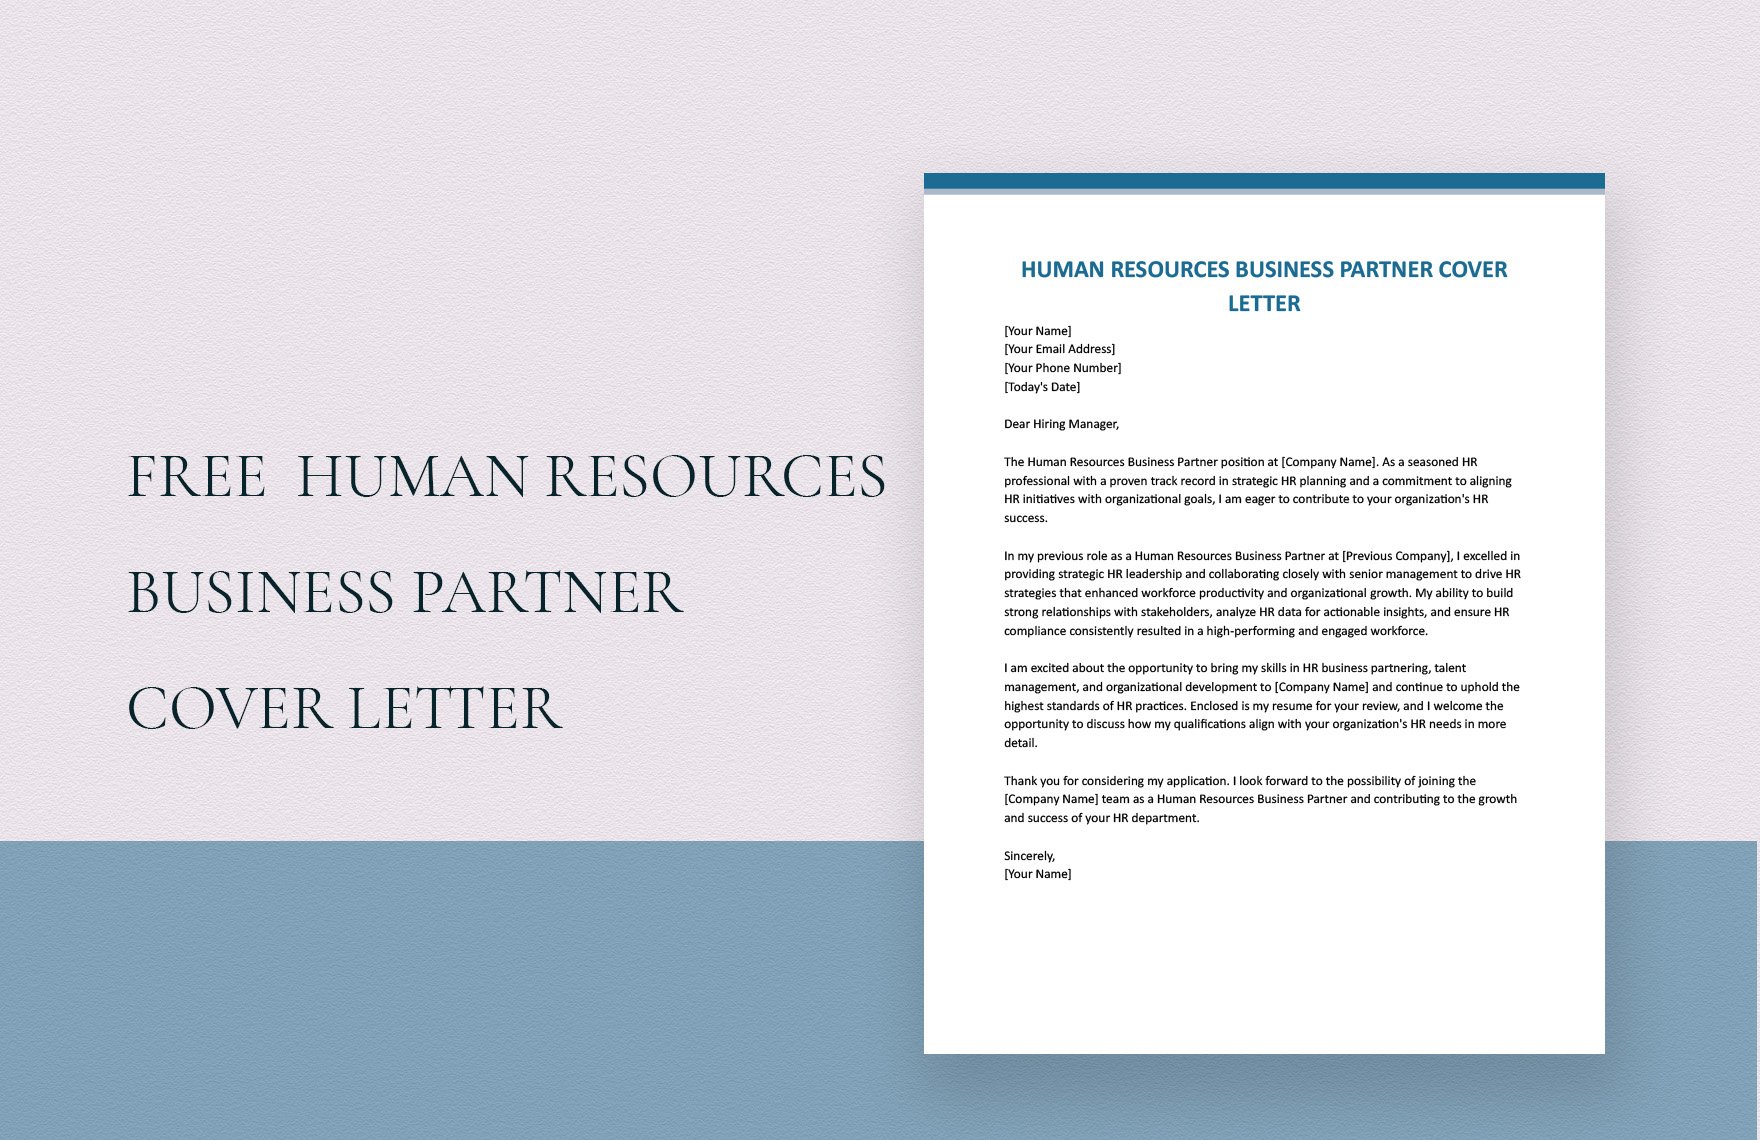 Human Resources Business Partner Cover Letter in Word, Google Docs